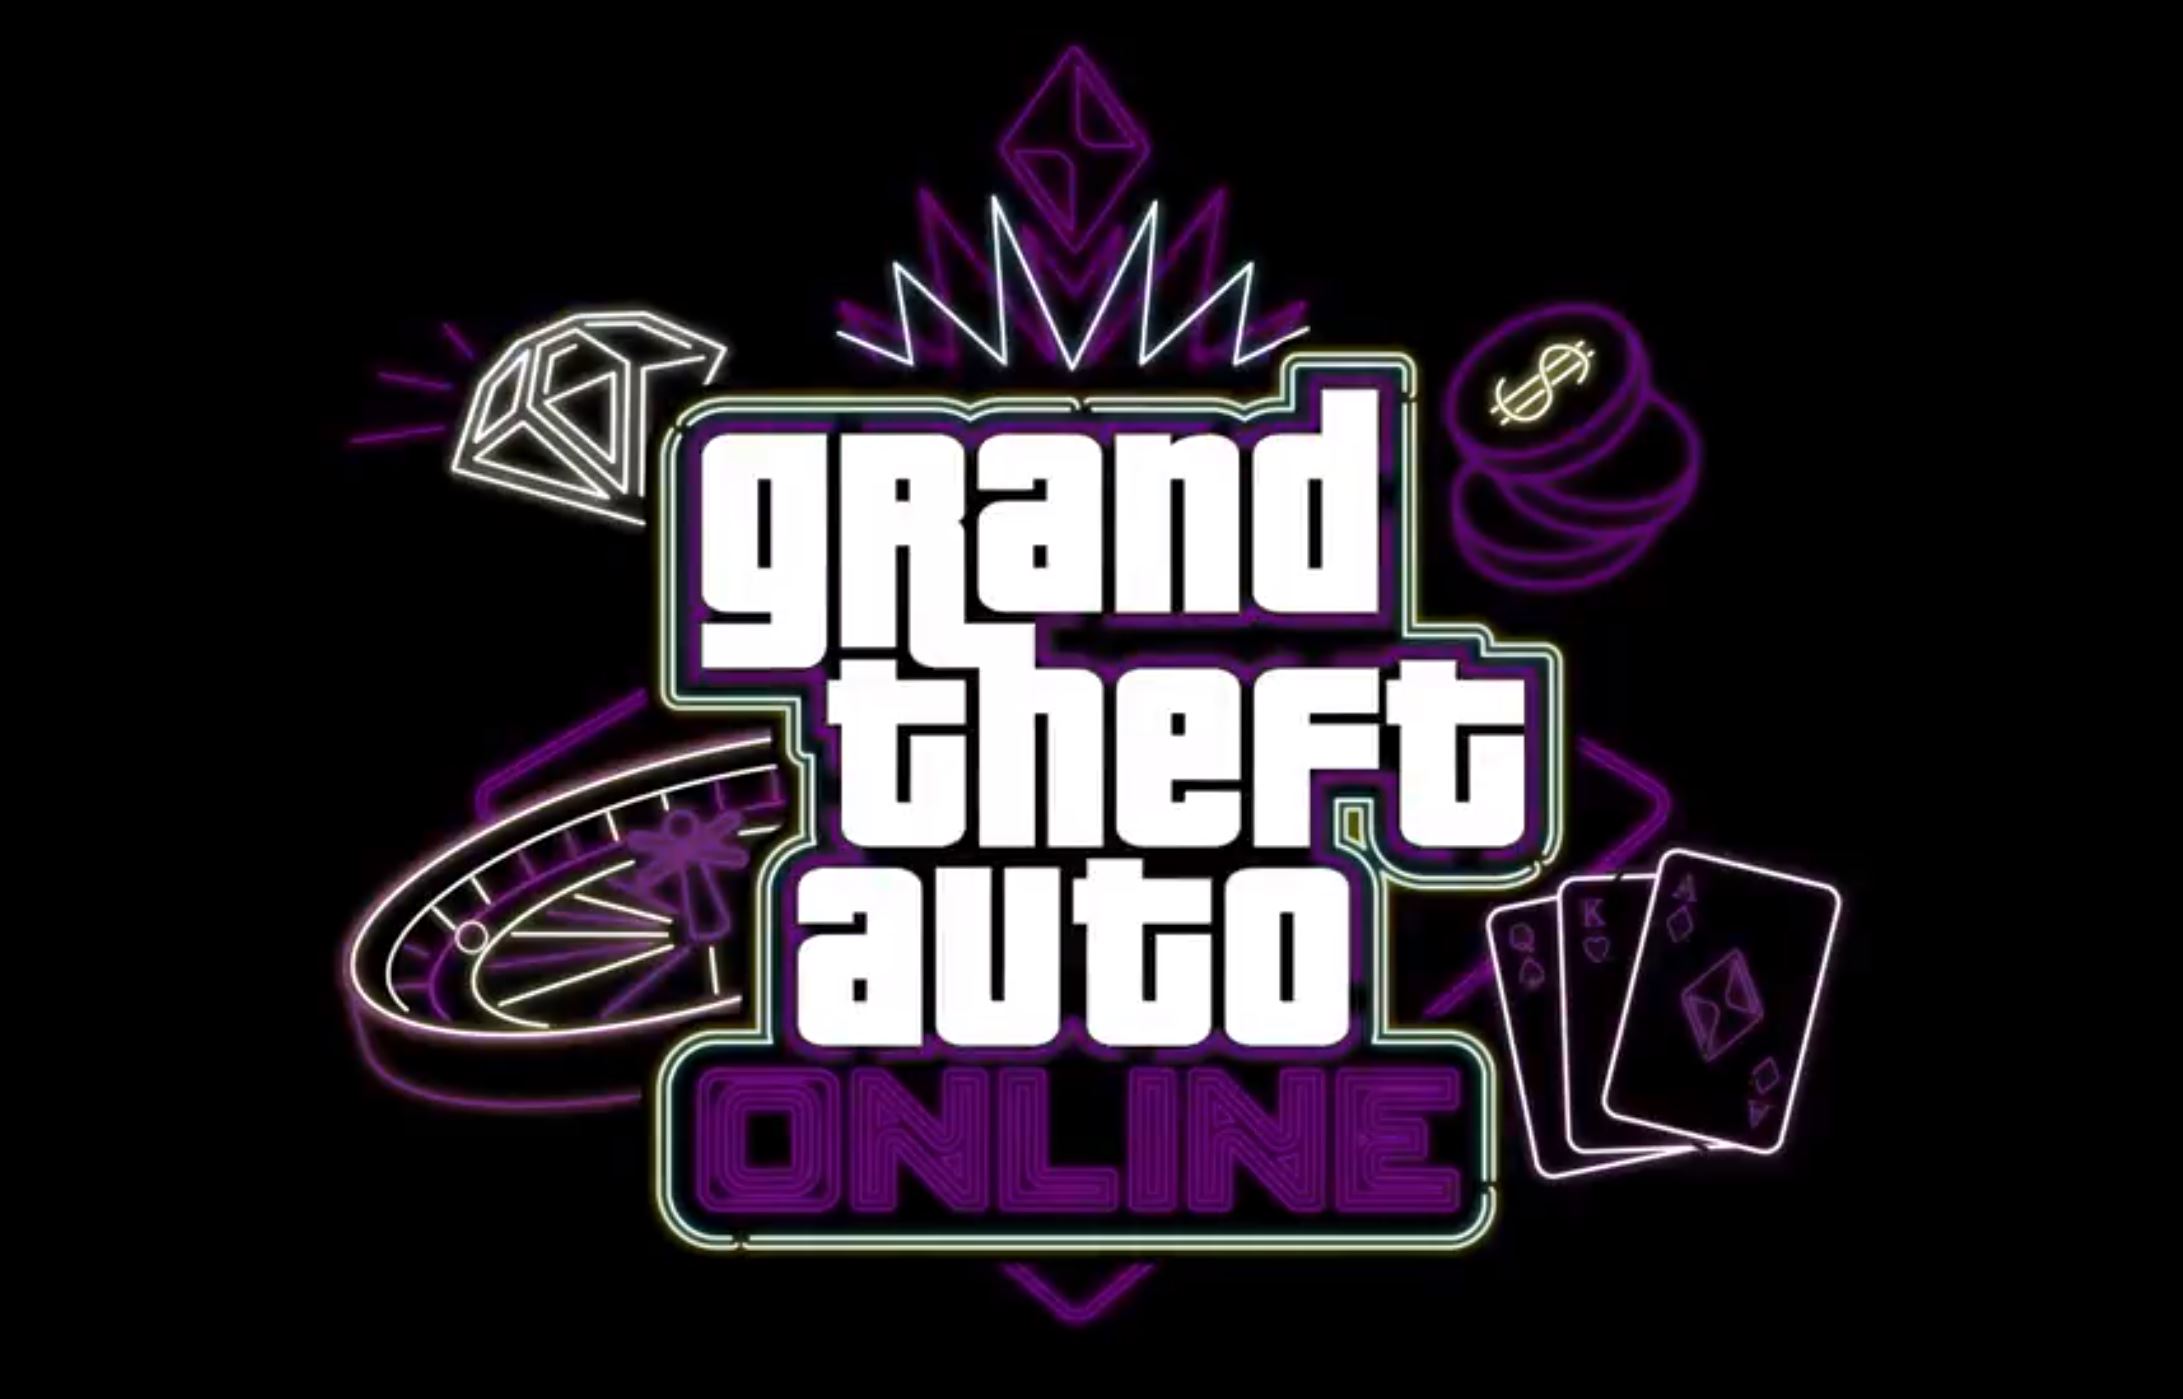 A GTA Online Casino Is Coming